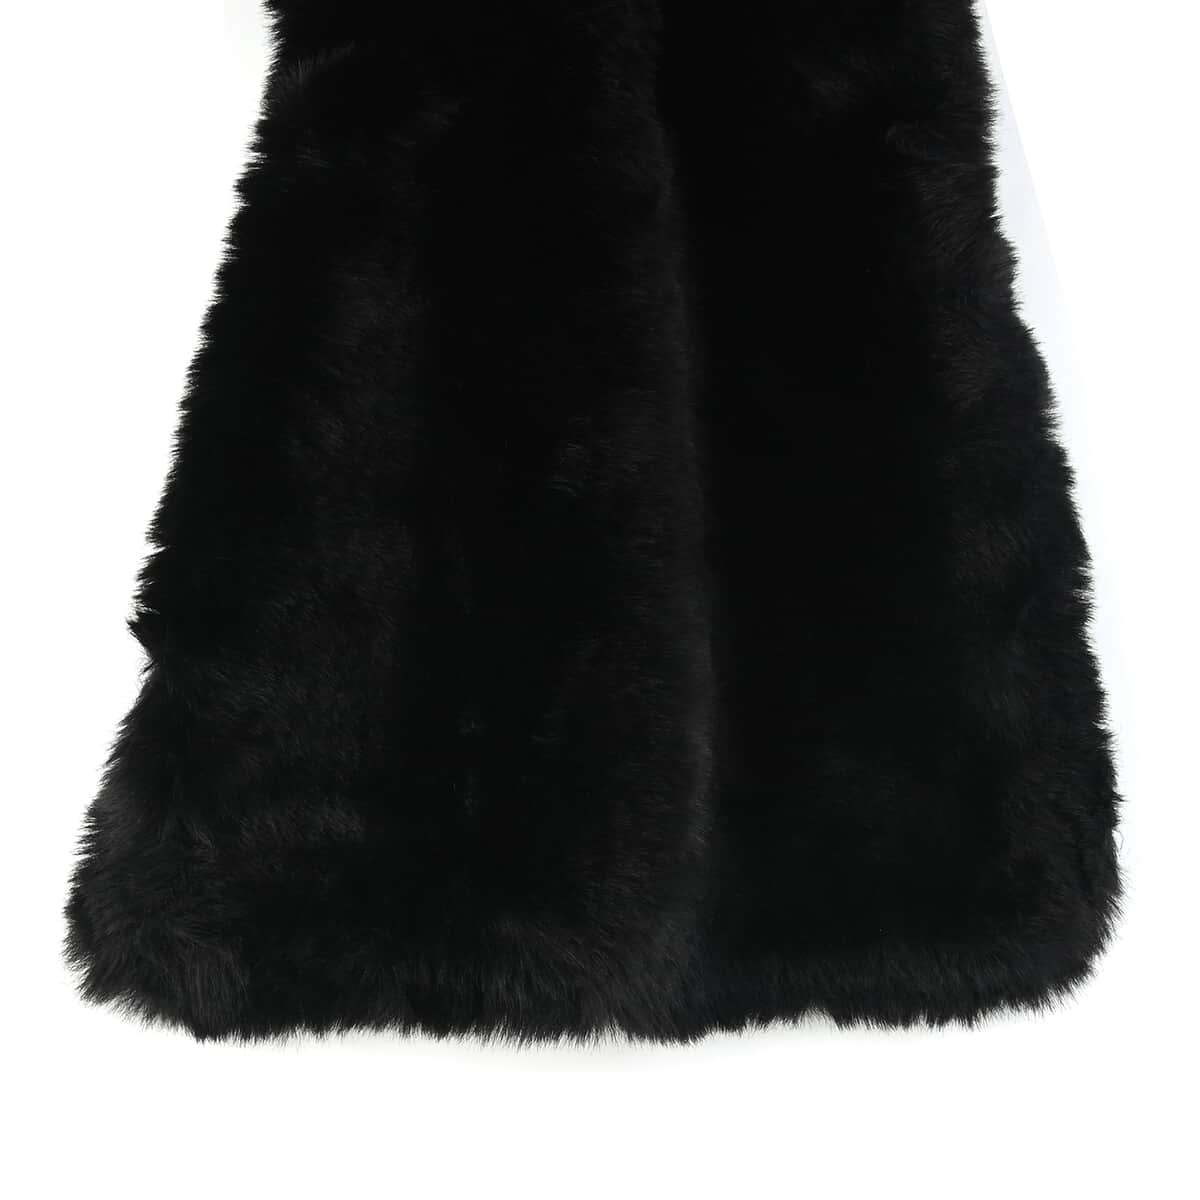 NYC CLOSEOUT Black Faux Fur Stole (72"x28") image number 3